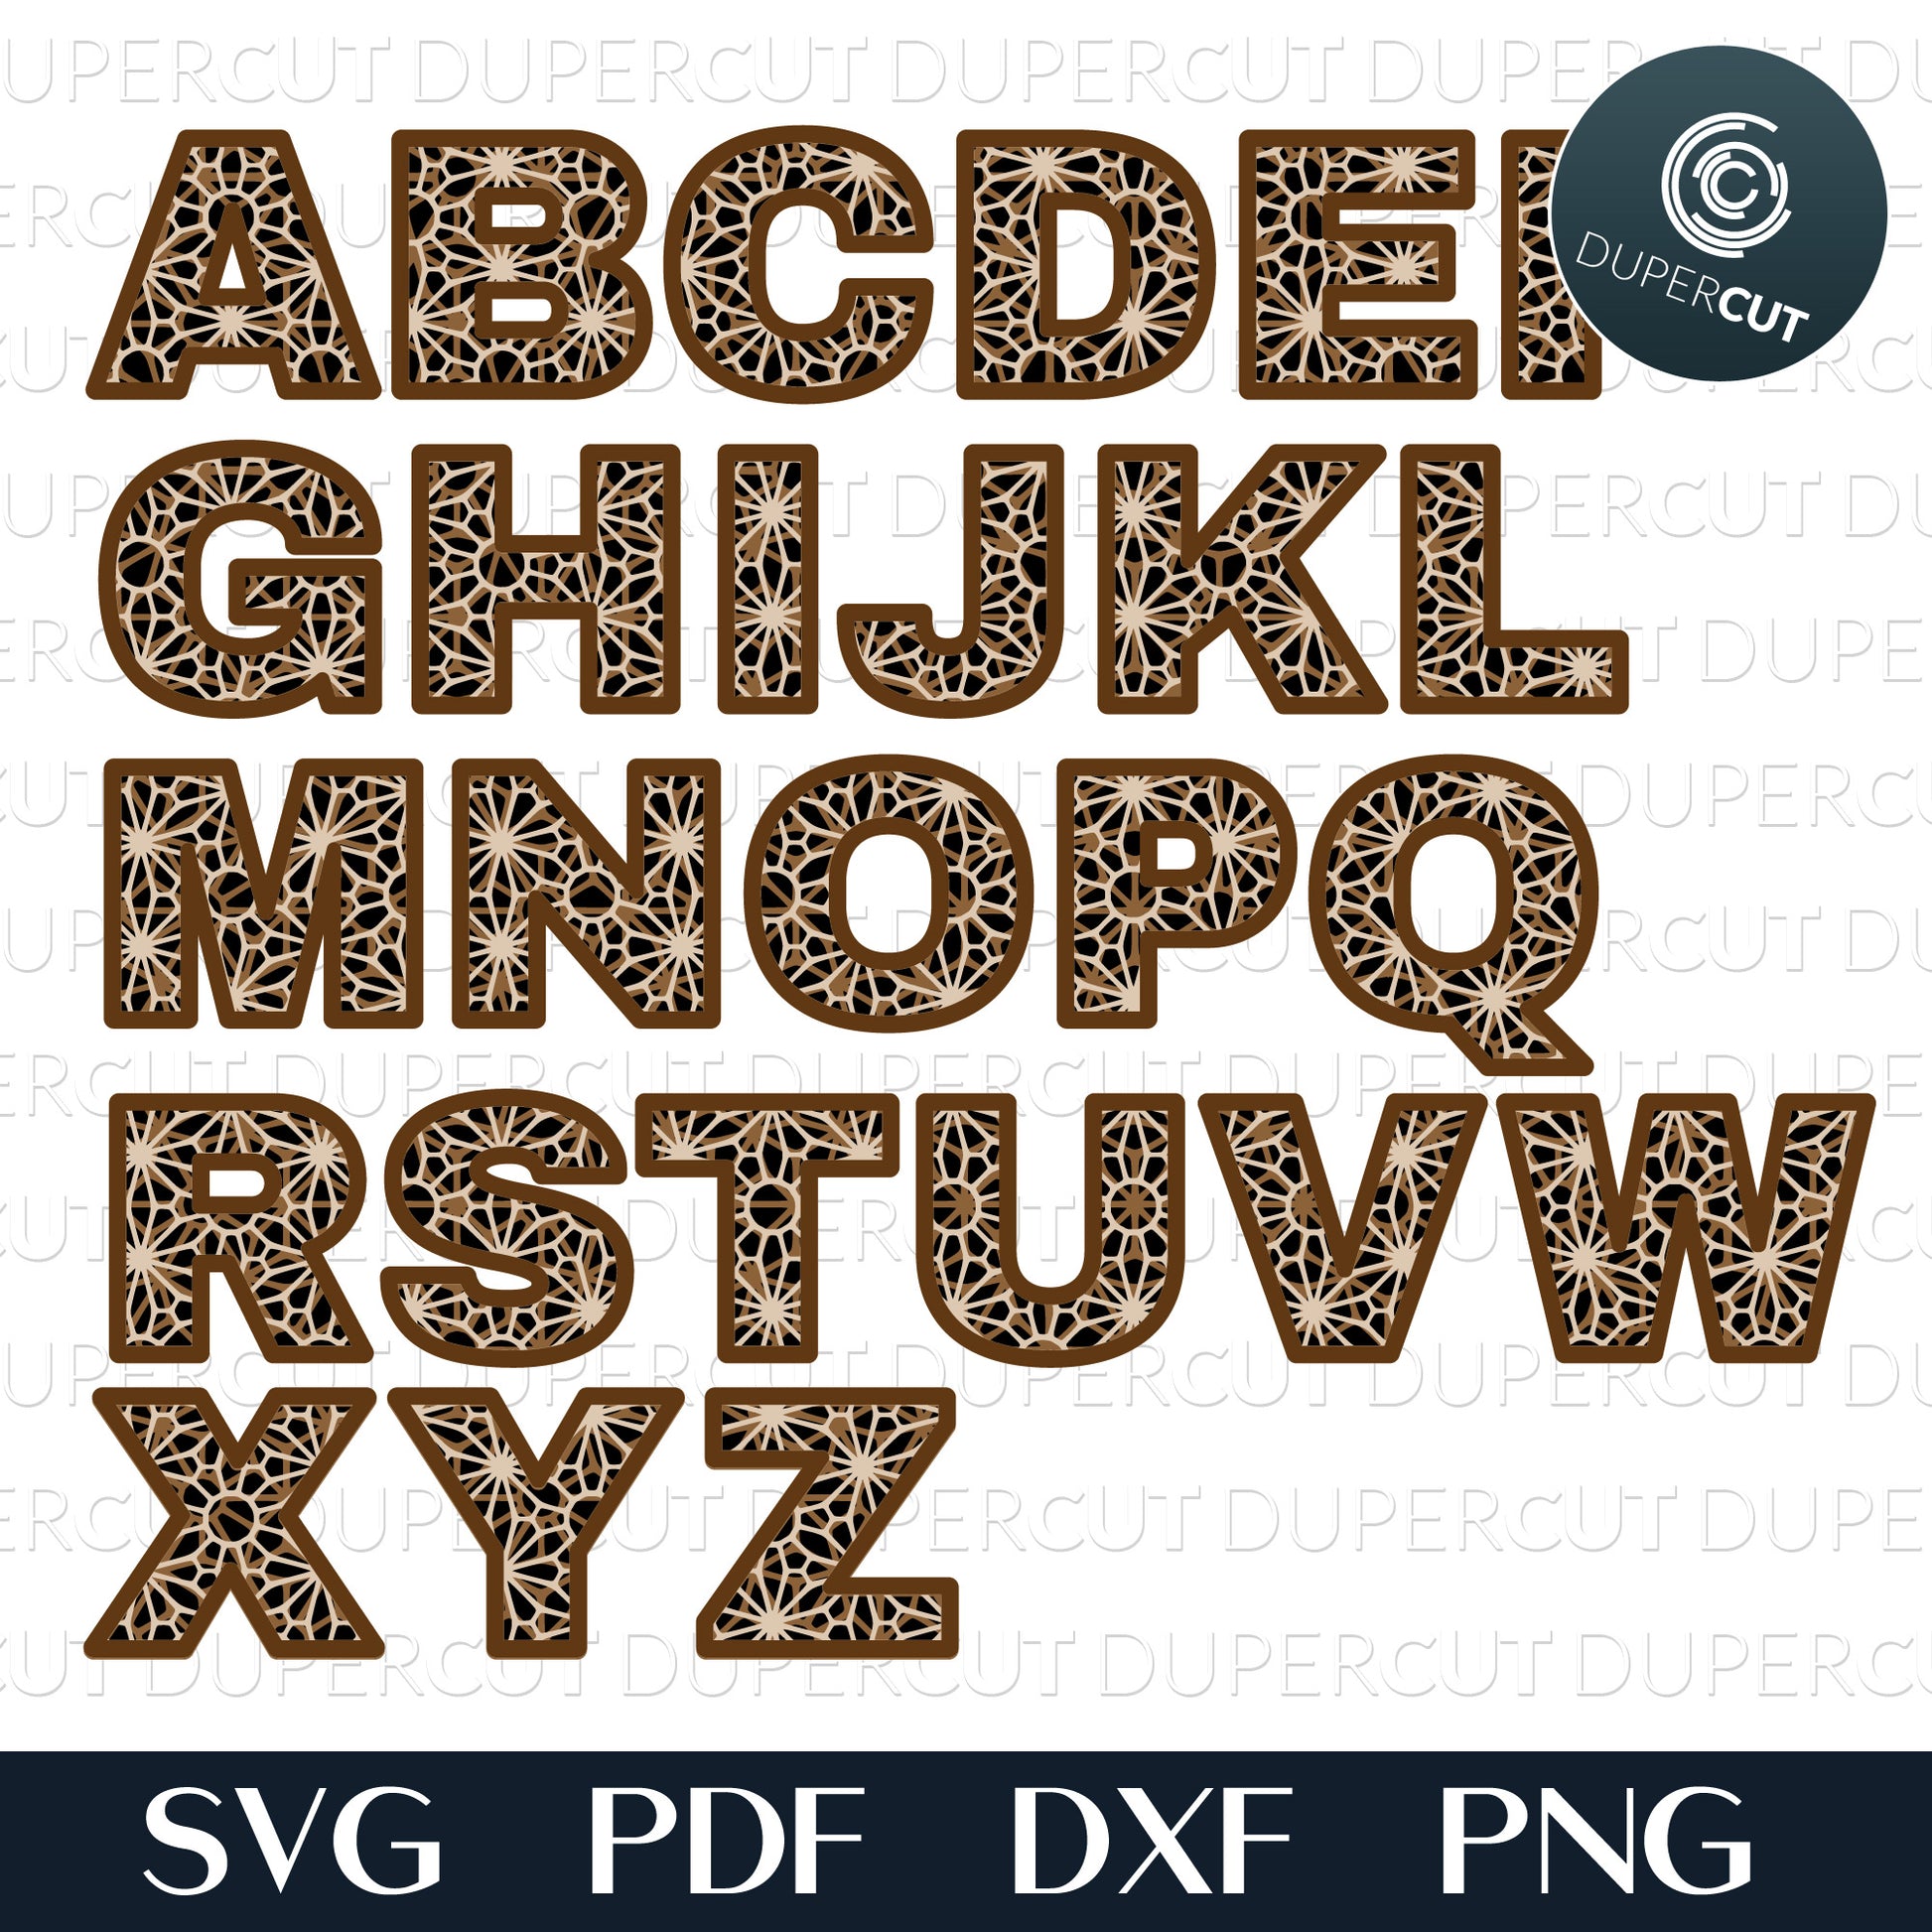 Alphabet letters - layered vector template. SVG PNG DXF cutting files for Cricut, Glowforge, Silhouette cameo, laser engraving